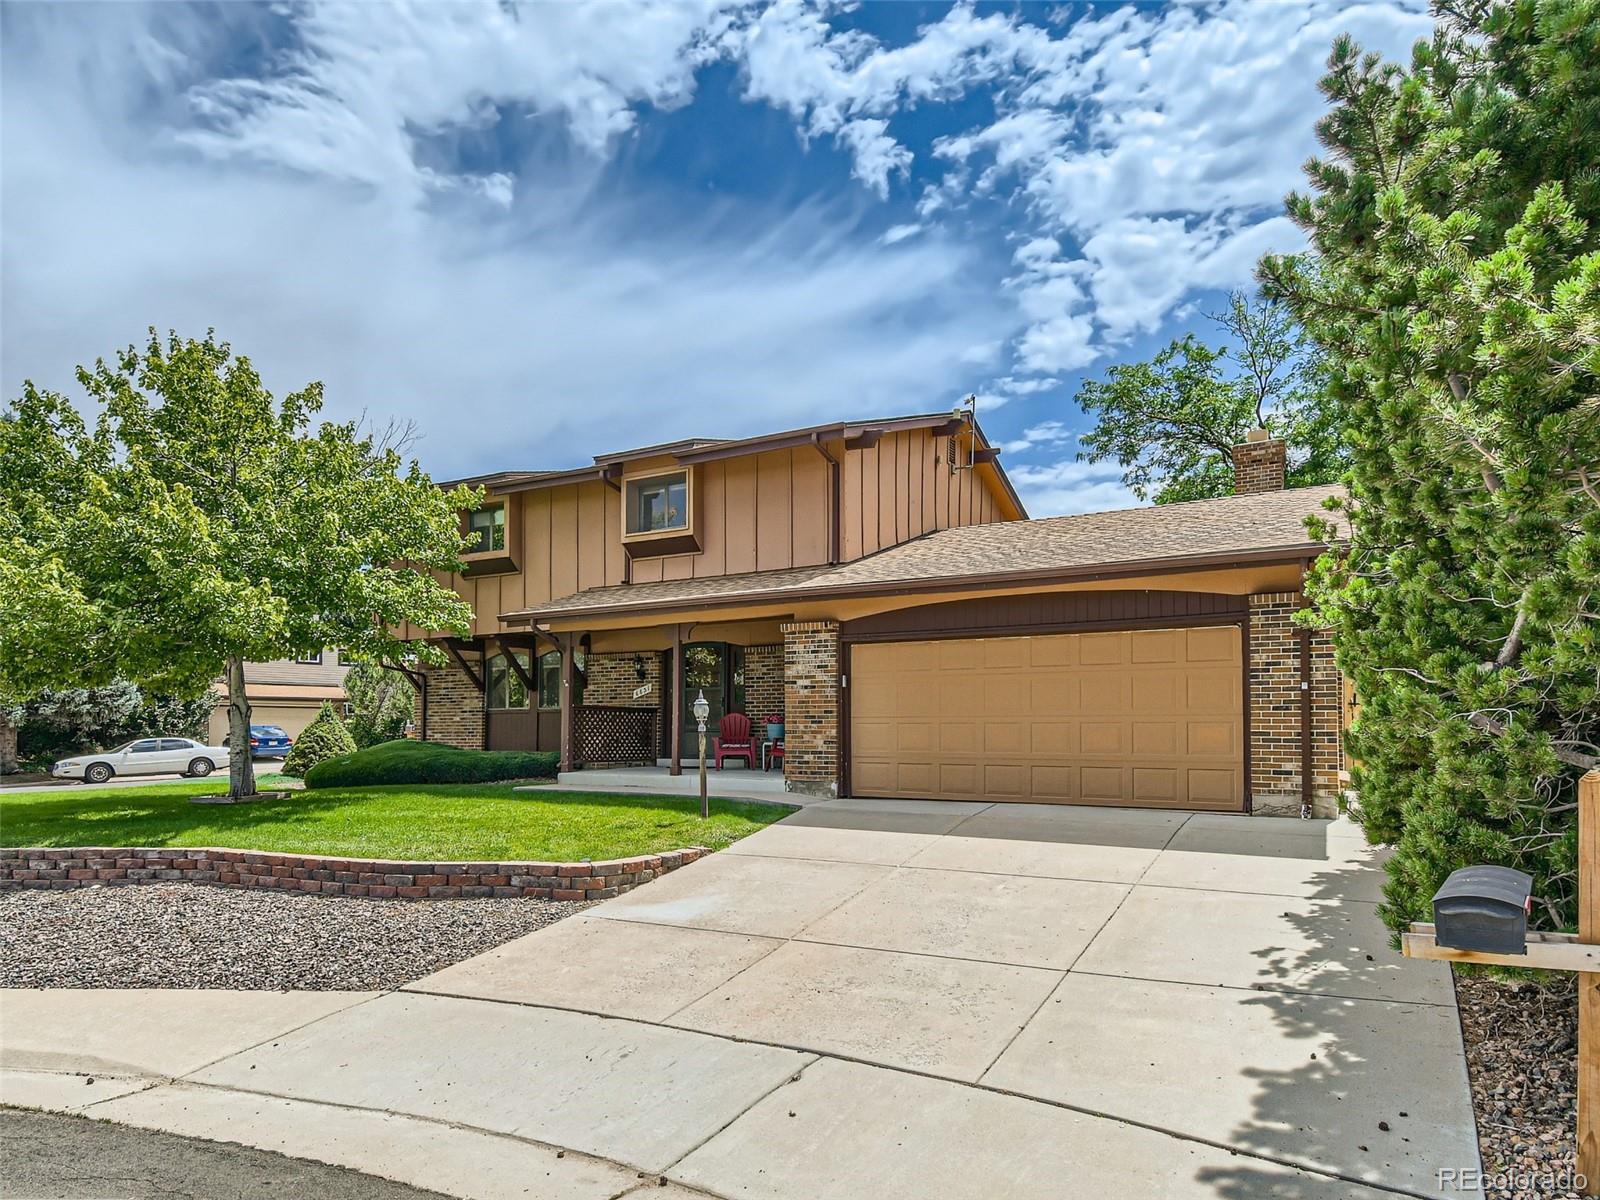 6631 W 73rd Place, arvada MLS: 7955361 Beds: 3 Baths: 3 Price: $565,000